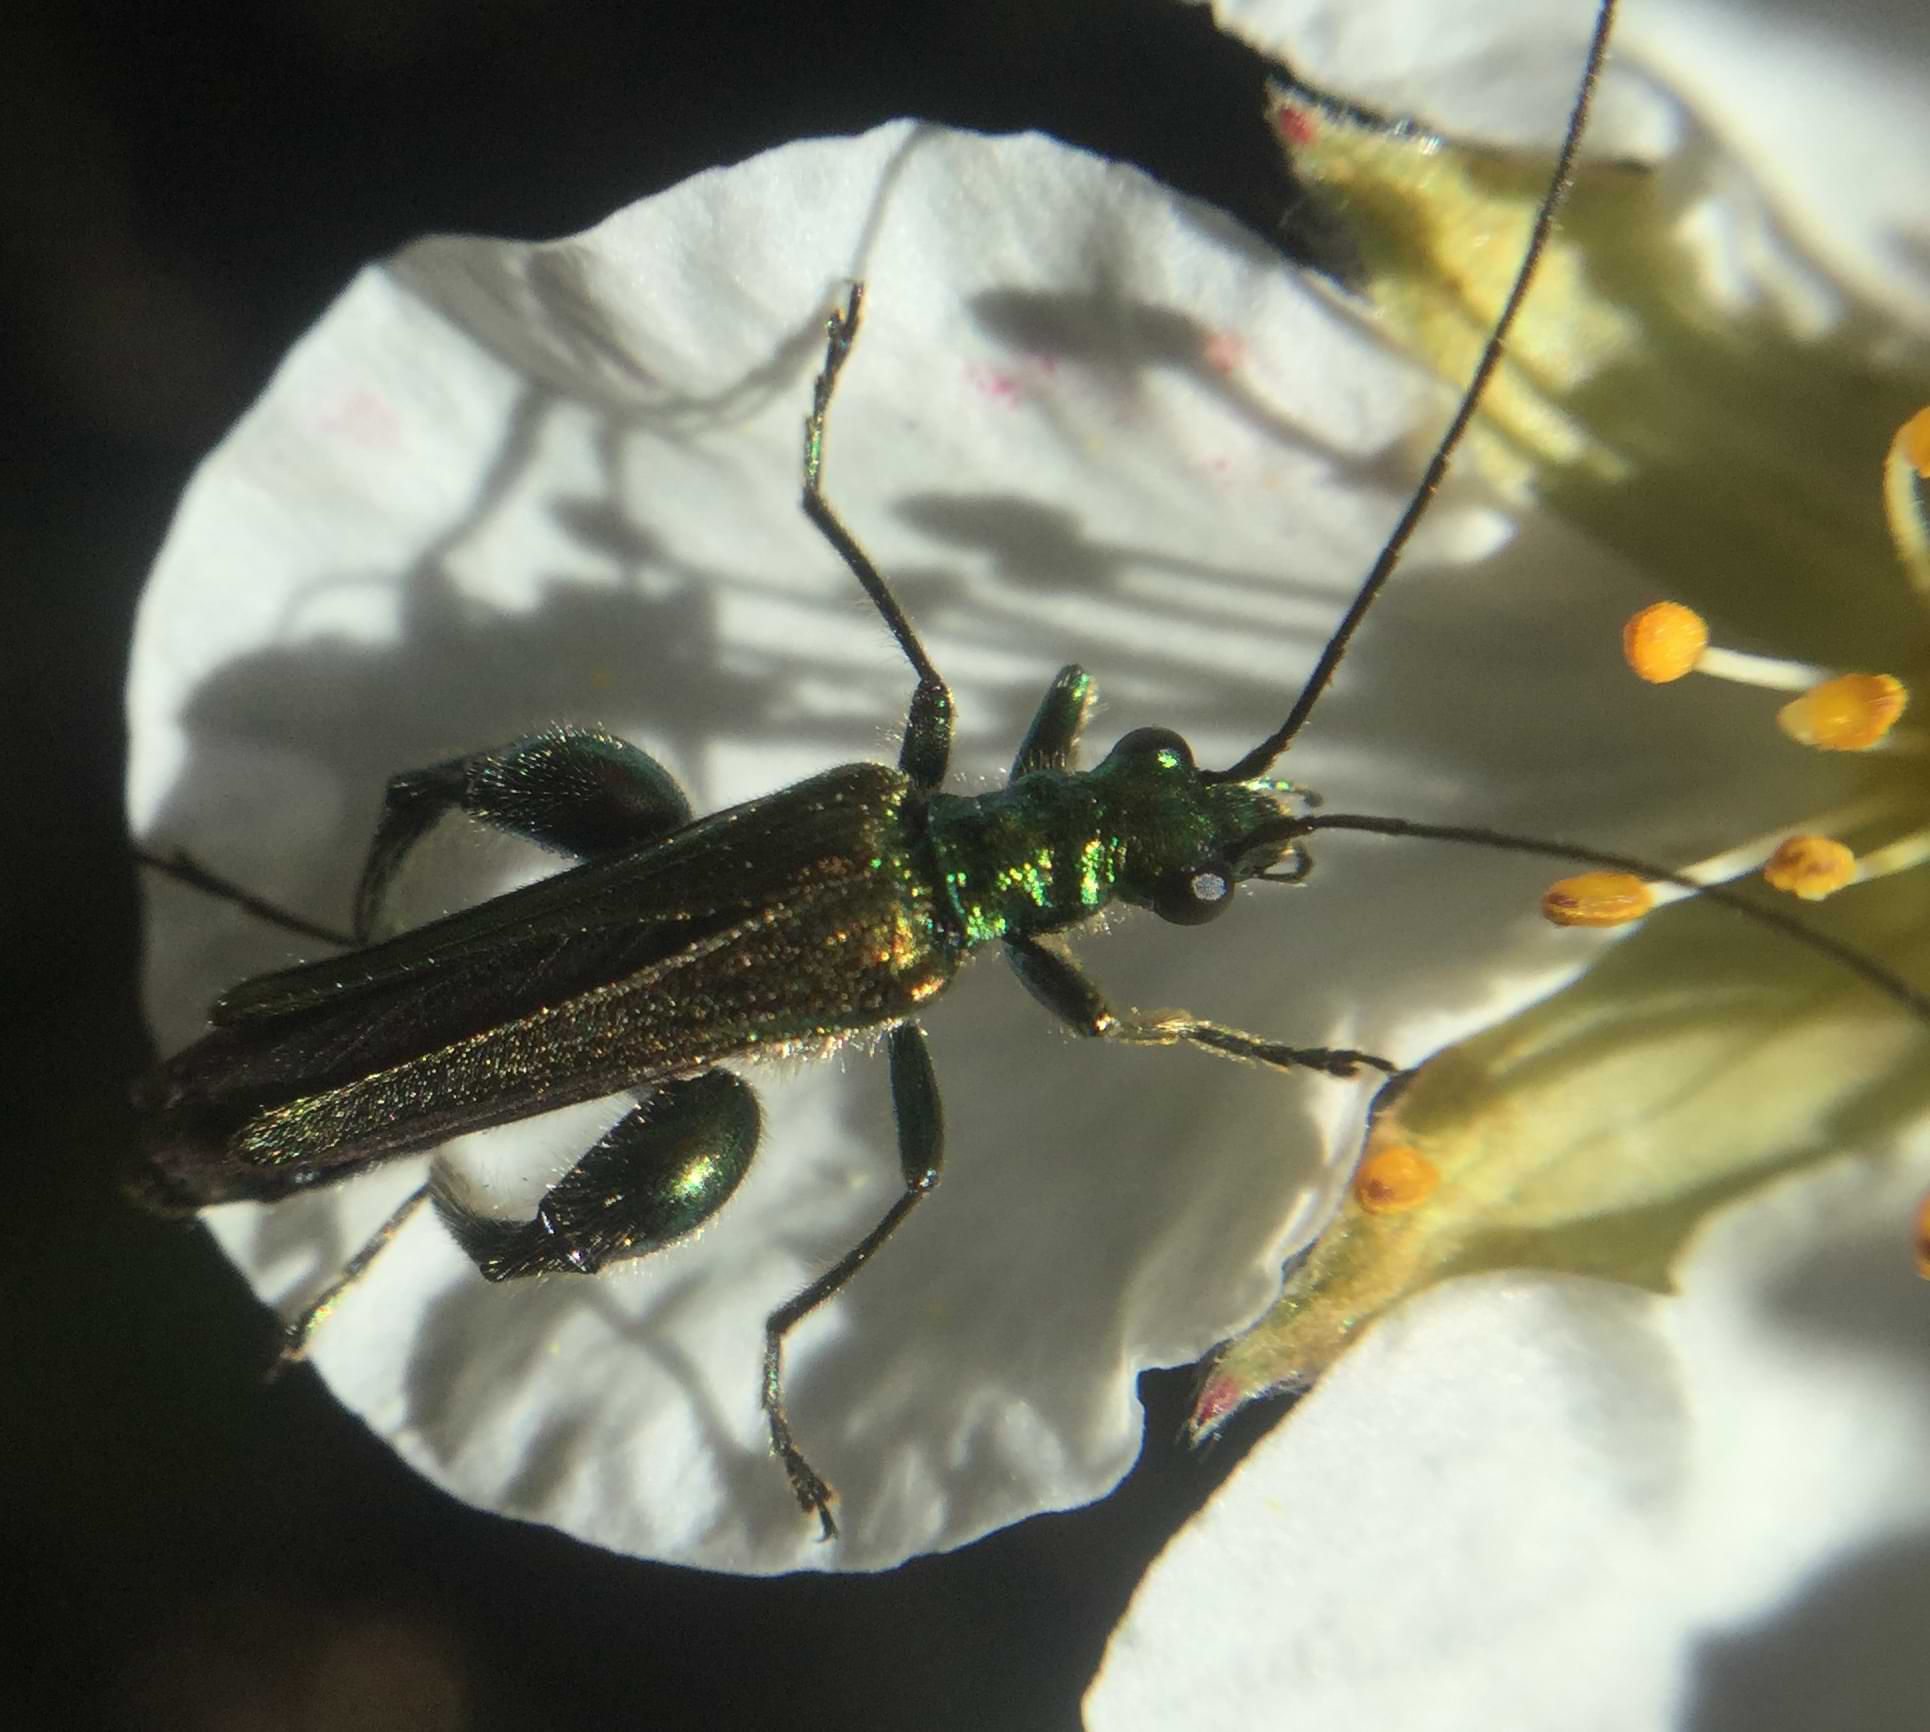 A long shiny green beetle resting on a white flower petal. The beetle's back legs are much thicker than the others.